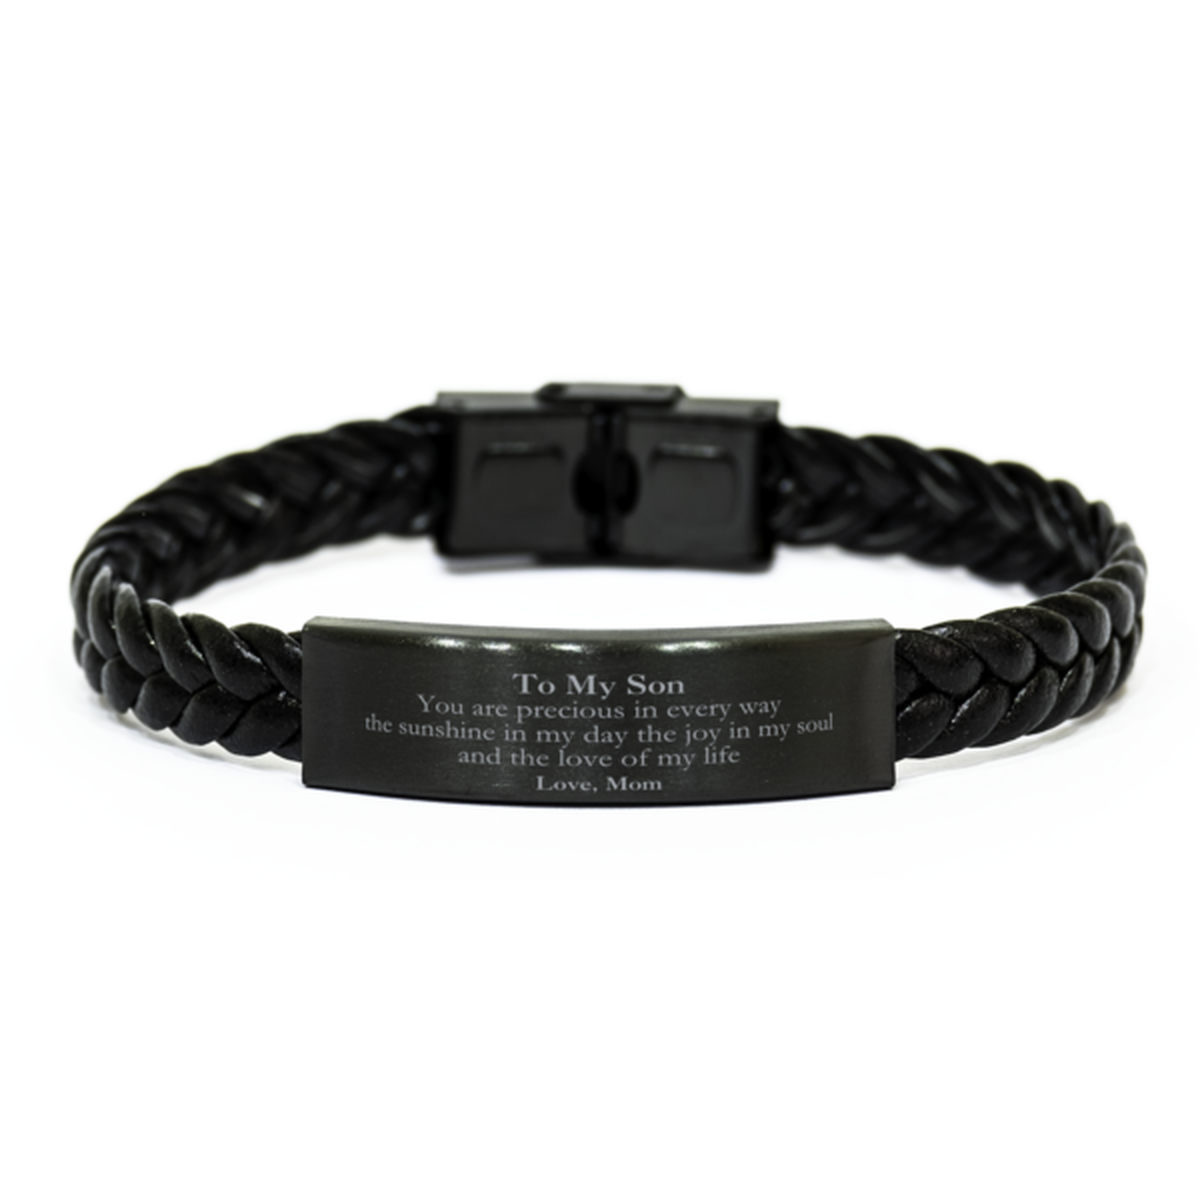 Graduation Gifts for Son Braided Leather Bracelet Present from Mom, Christmas Son Birthday Gifts Son You are precious in every way the sunshine in my day. Love, Mom